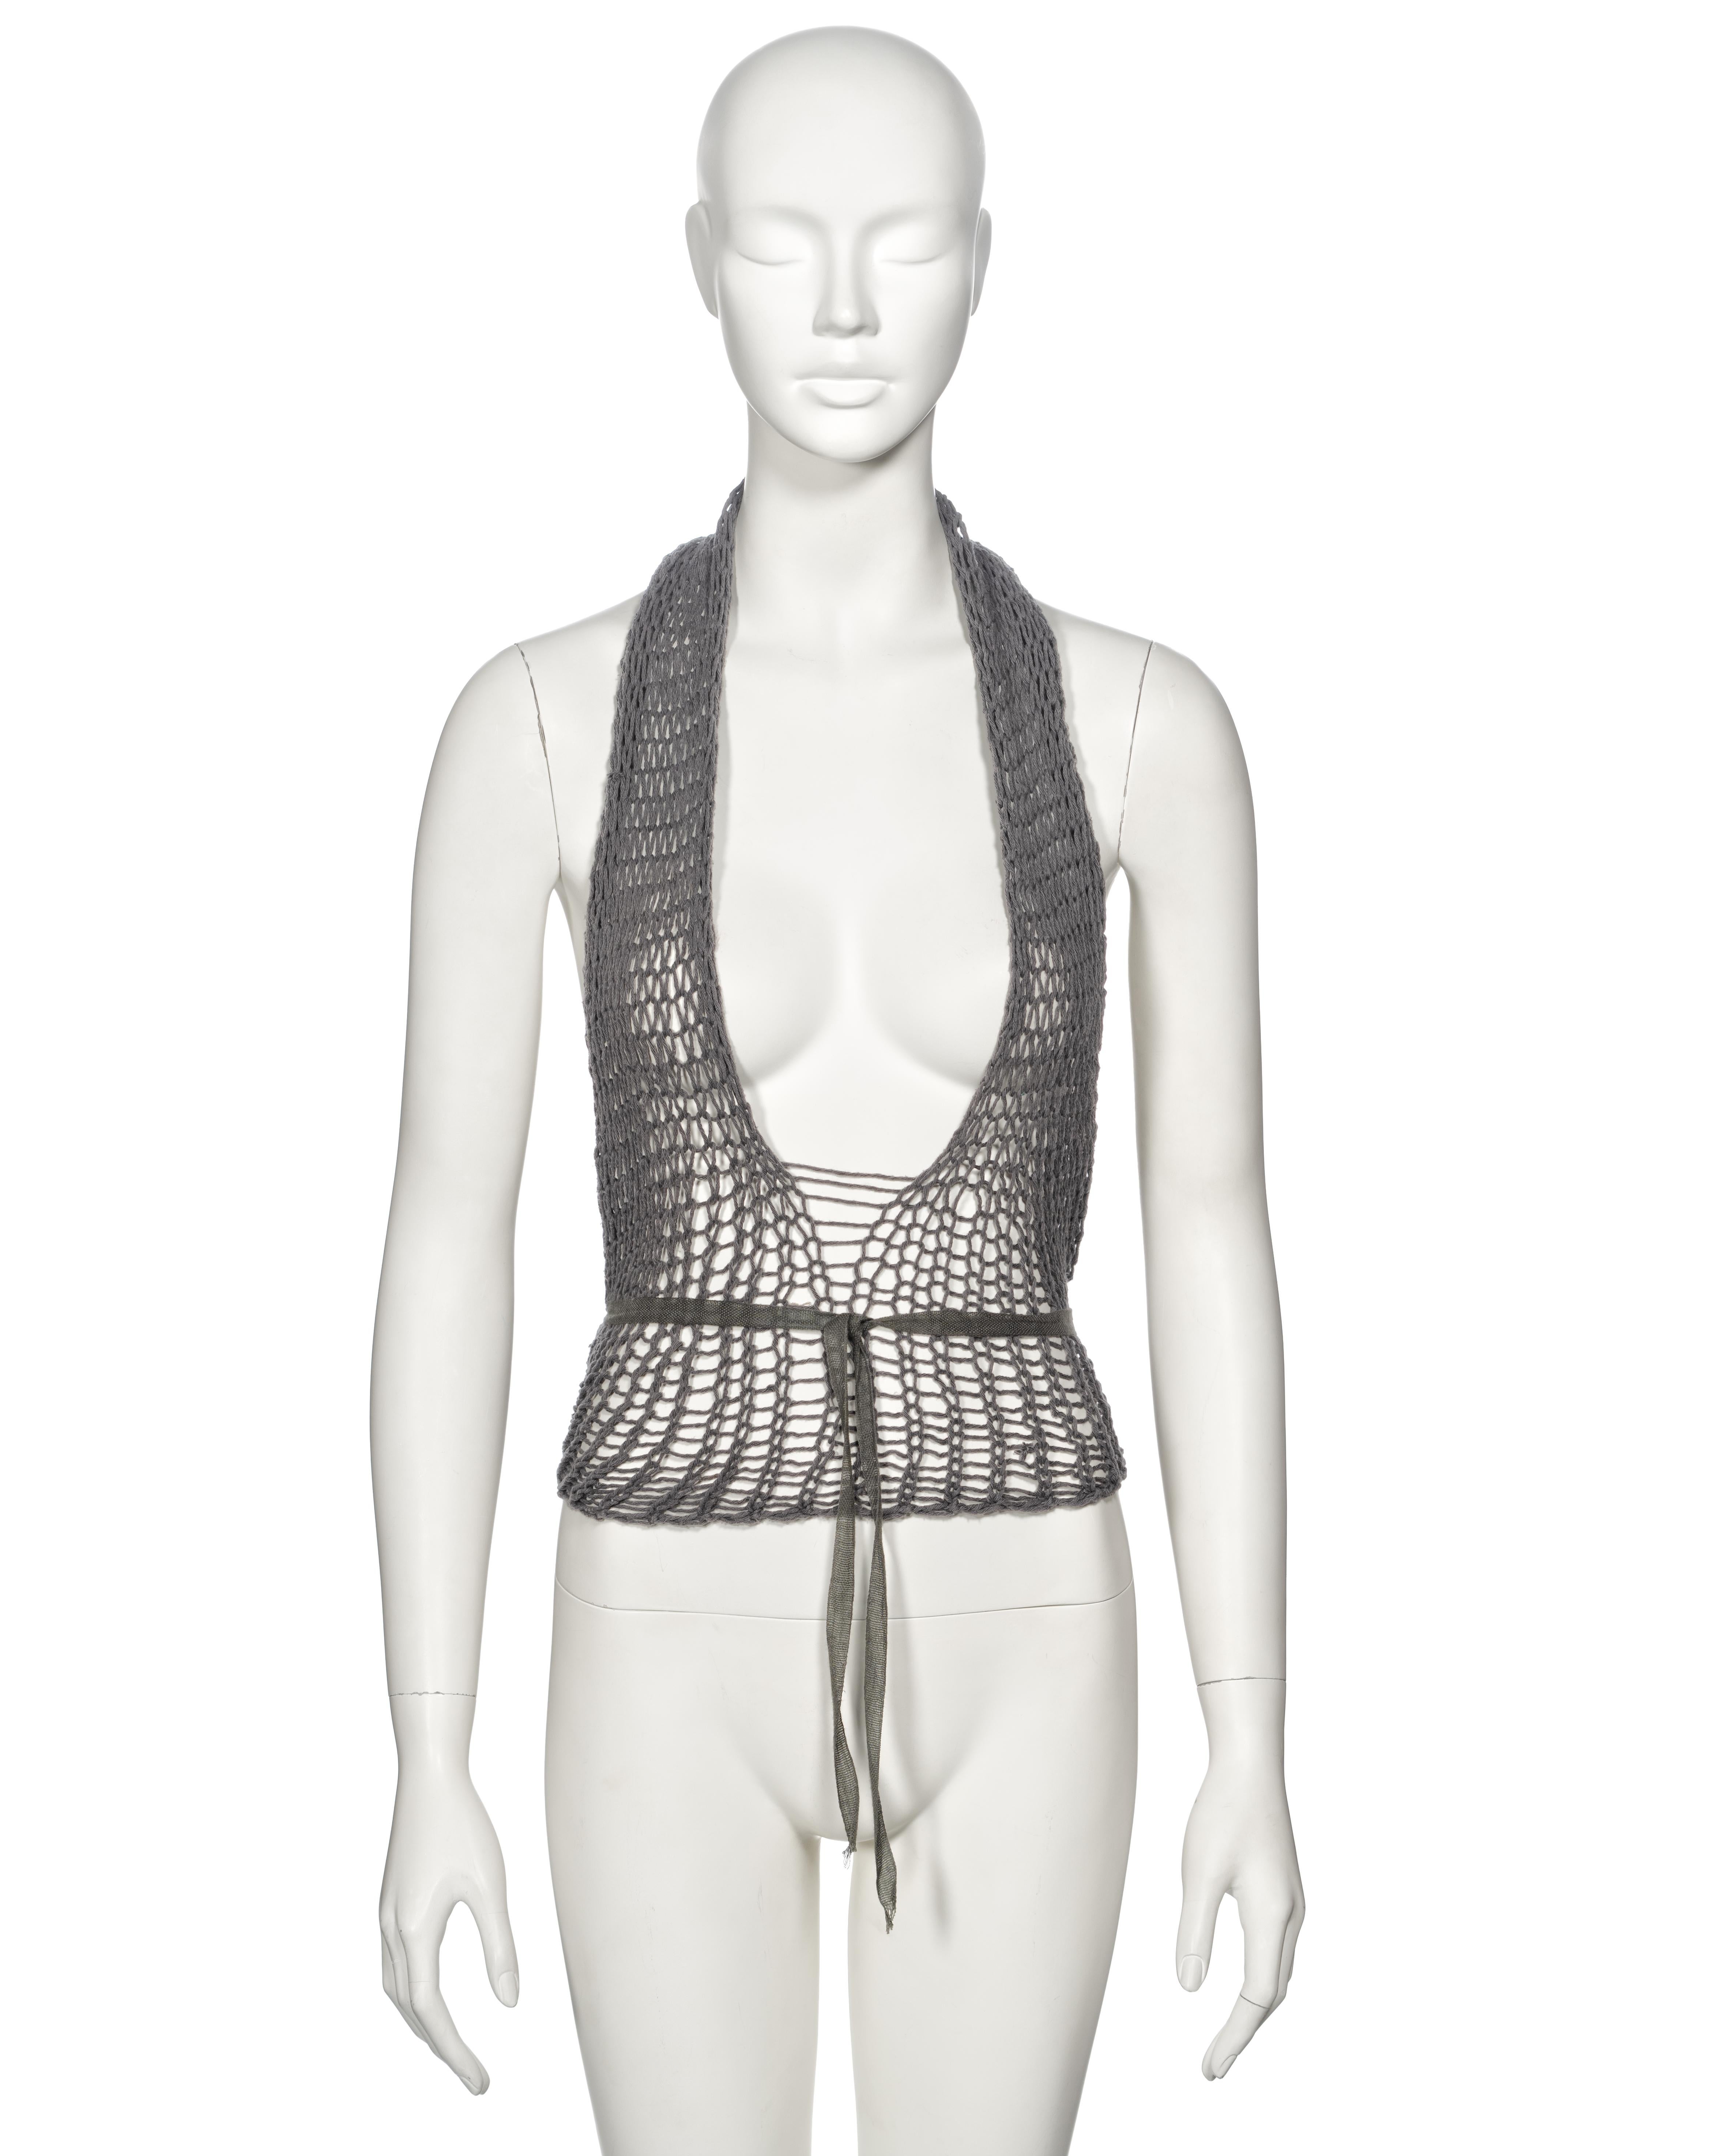 ▪ Archival Margiela Top
▪ Creative Director: Martin Margiela
▪ Spring-Summer 1993
▪ Openwork knit in grey cotton yarn 
▪ Halterneck 
▪ Plunging neckline 
▪ Wrap fastening with cotton ribbon ties 
▪ One Size
▪ Made for the spring-summer 1994